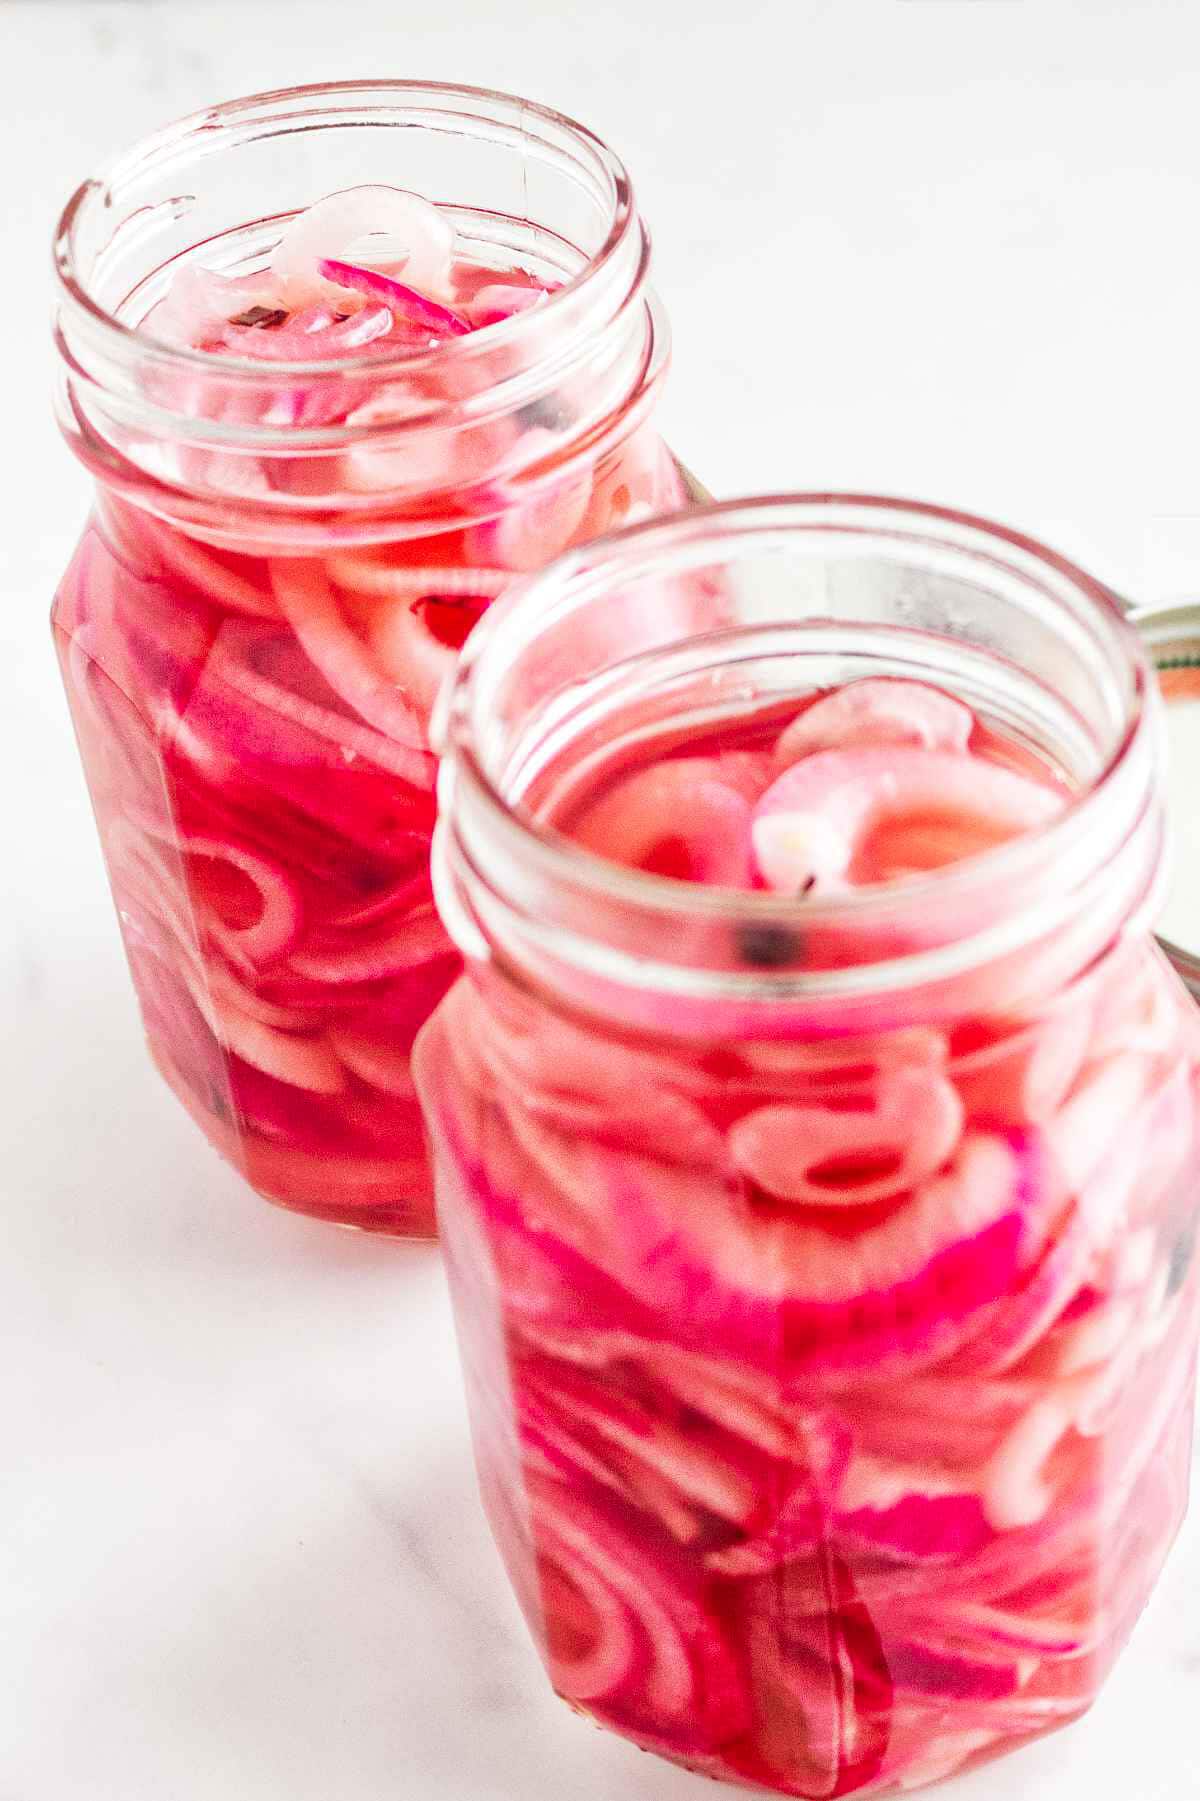 jar of pickled red onions.